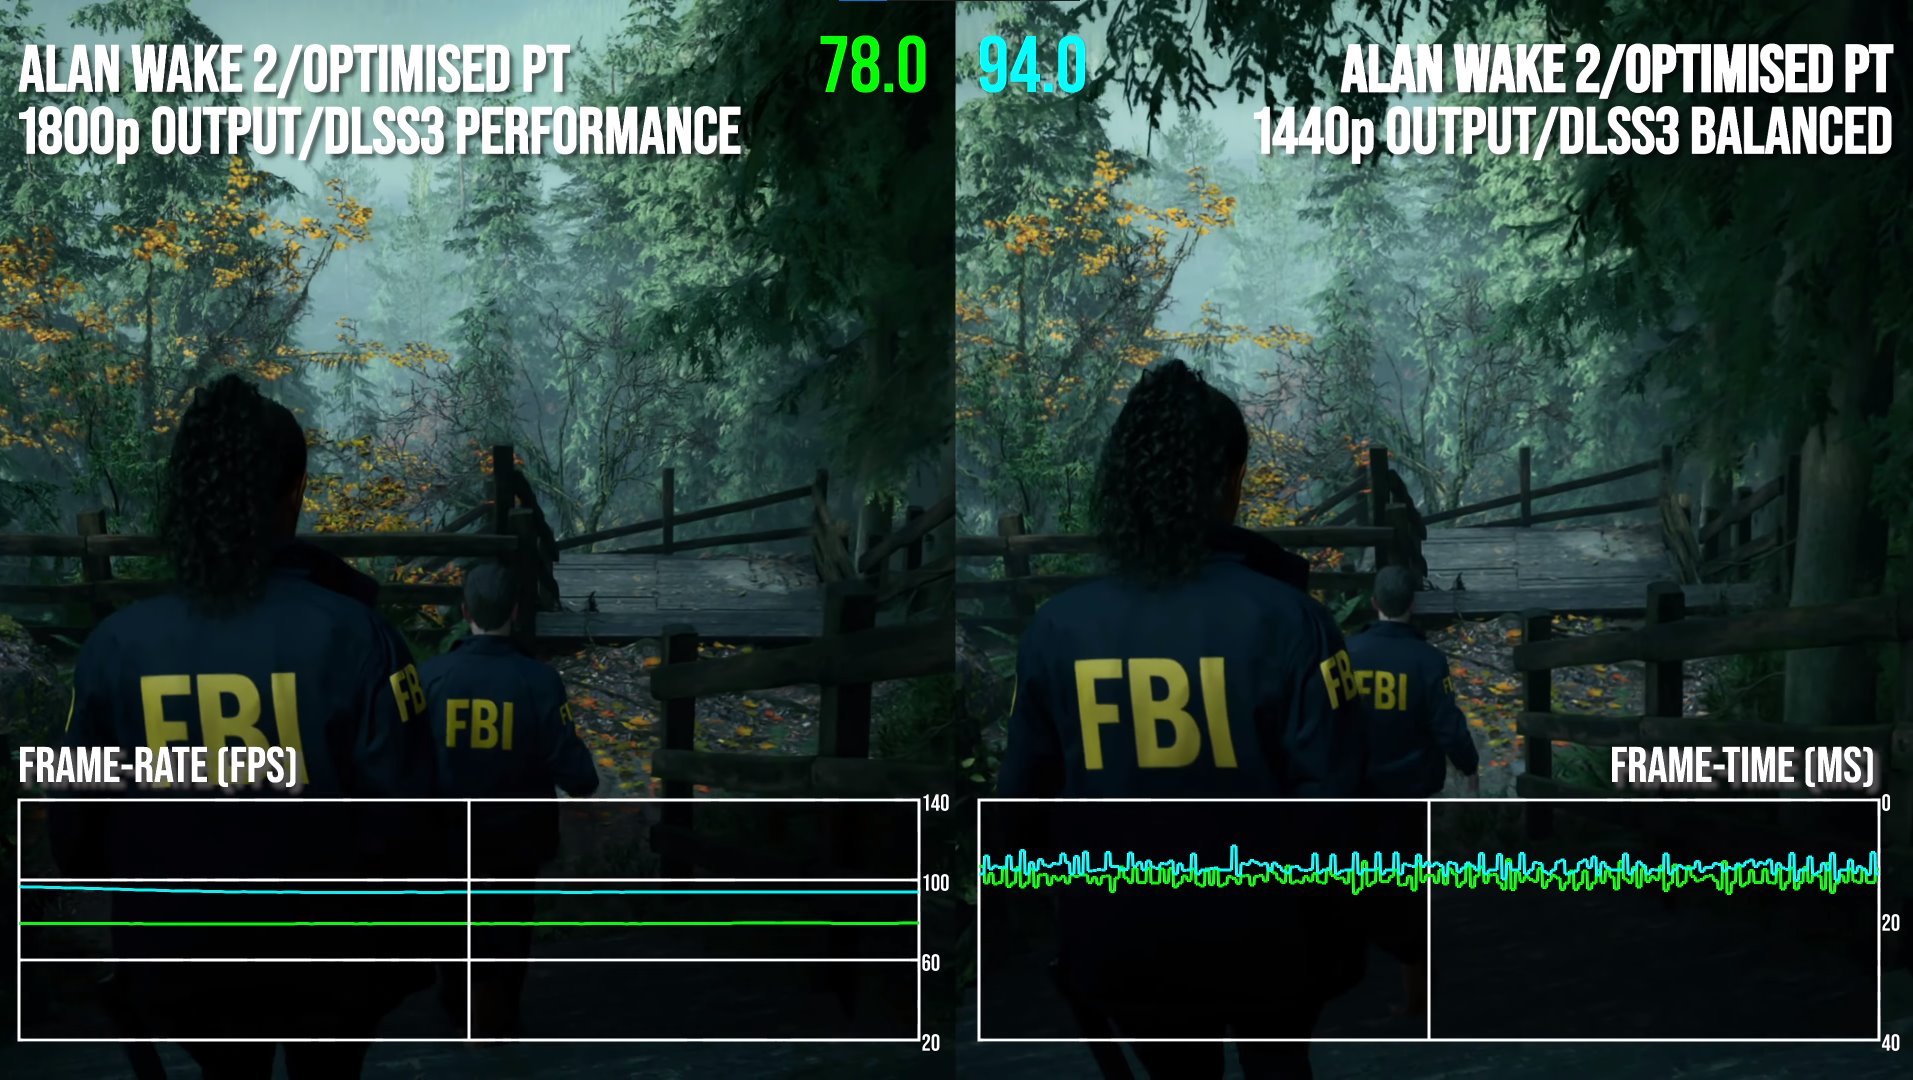 Alan Wake 2 on optimized settings, path tracing and DLSS3